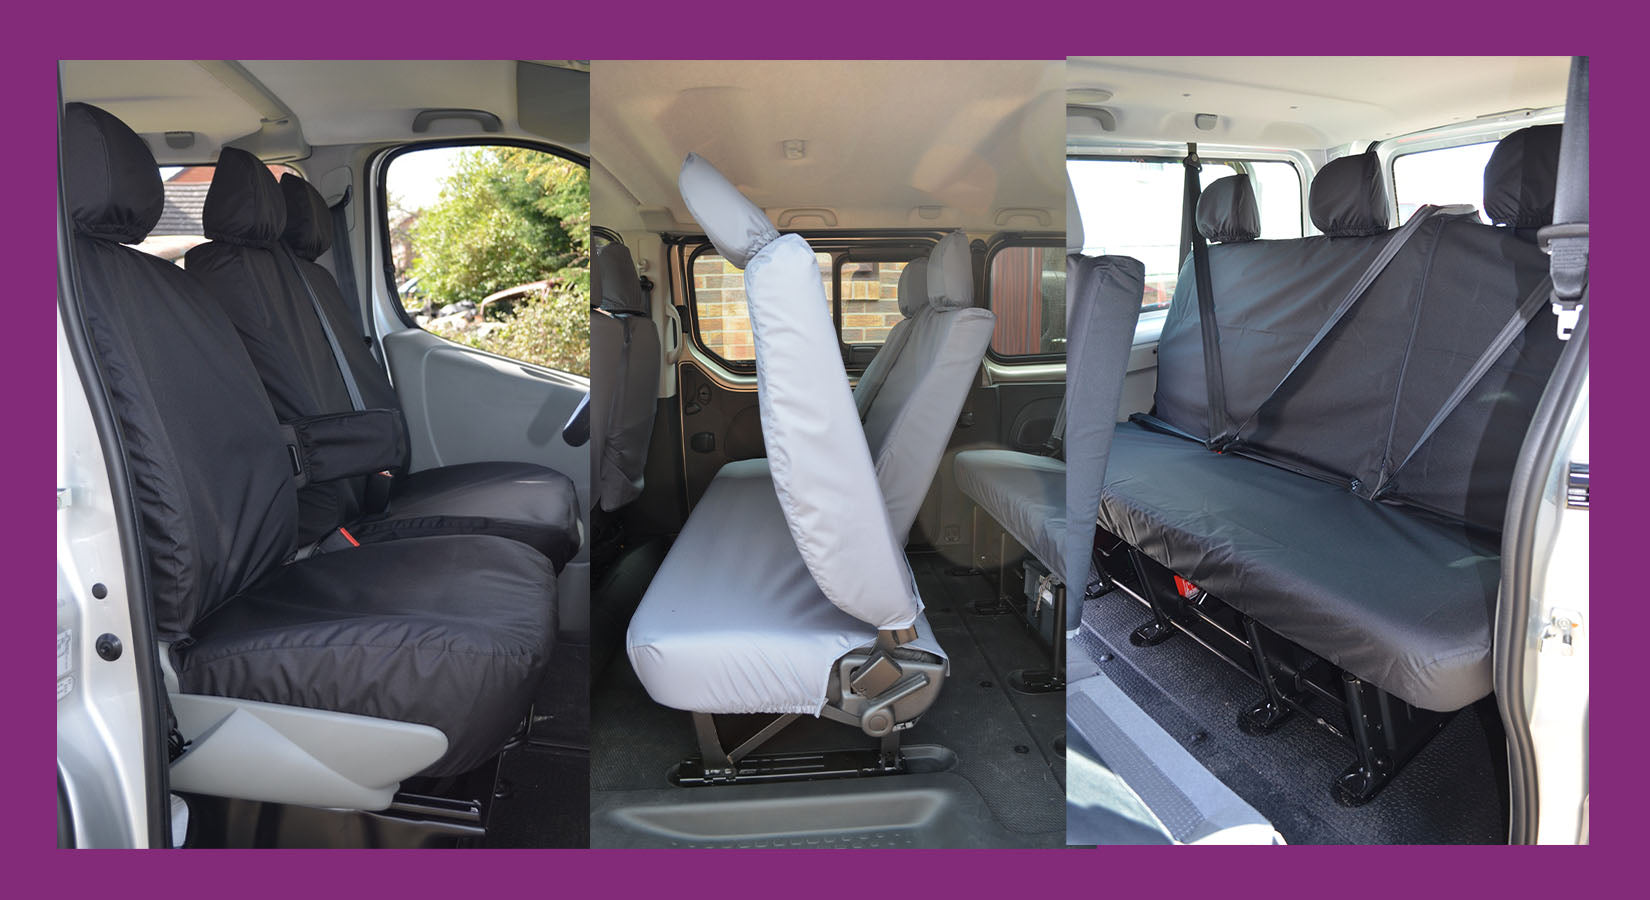 Nissan Primastar Minibus Seat Covers now listed